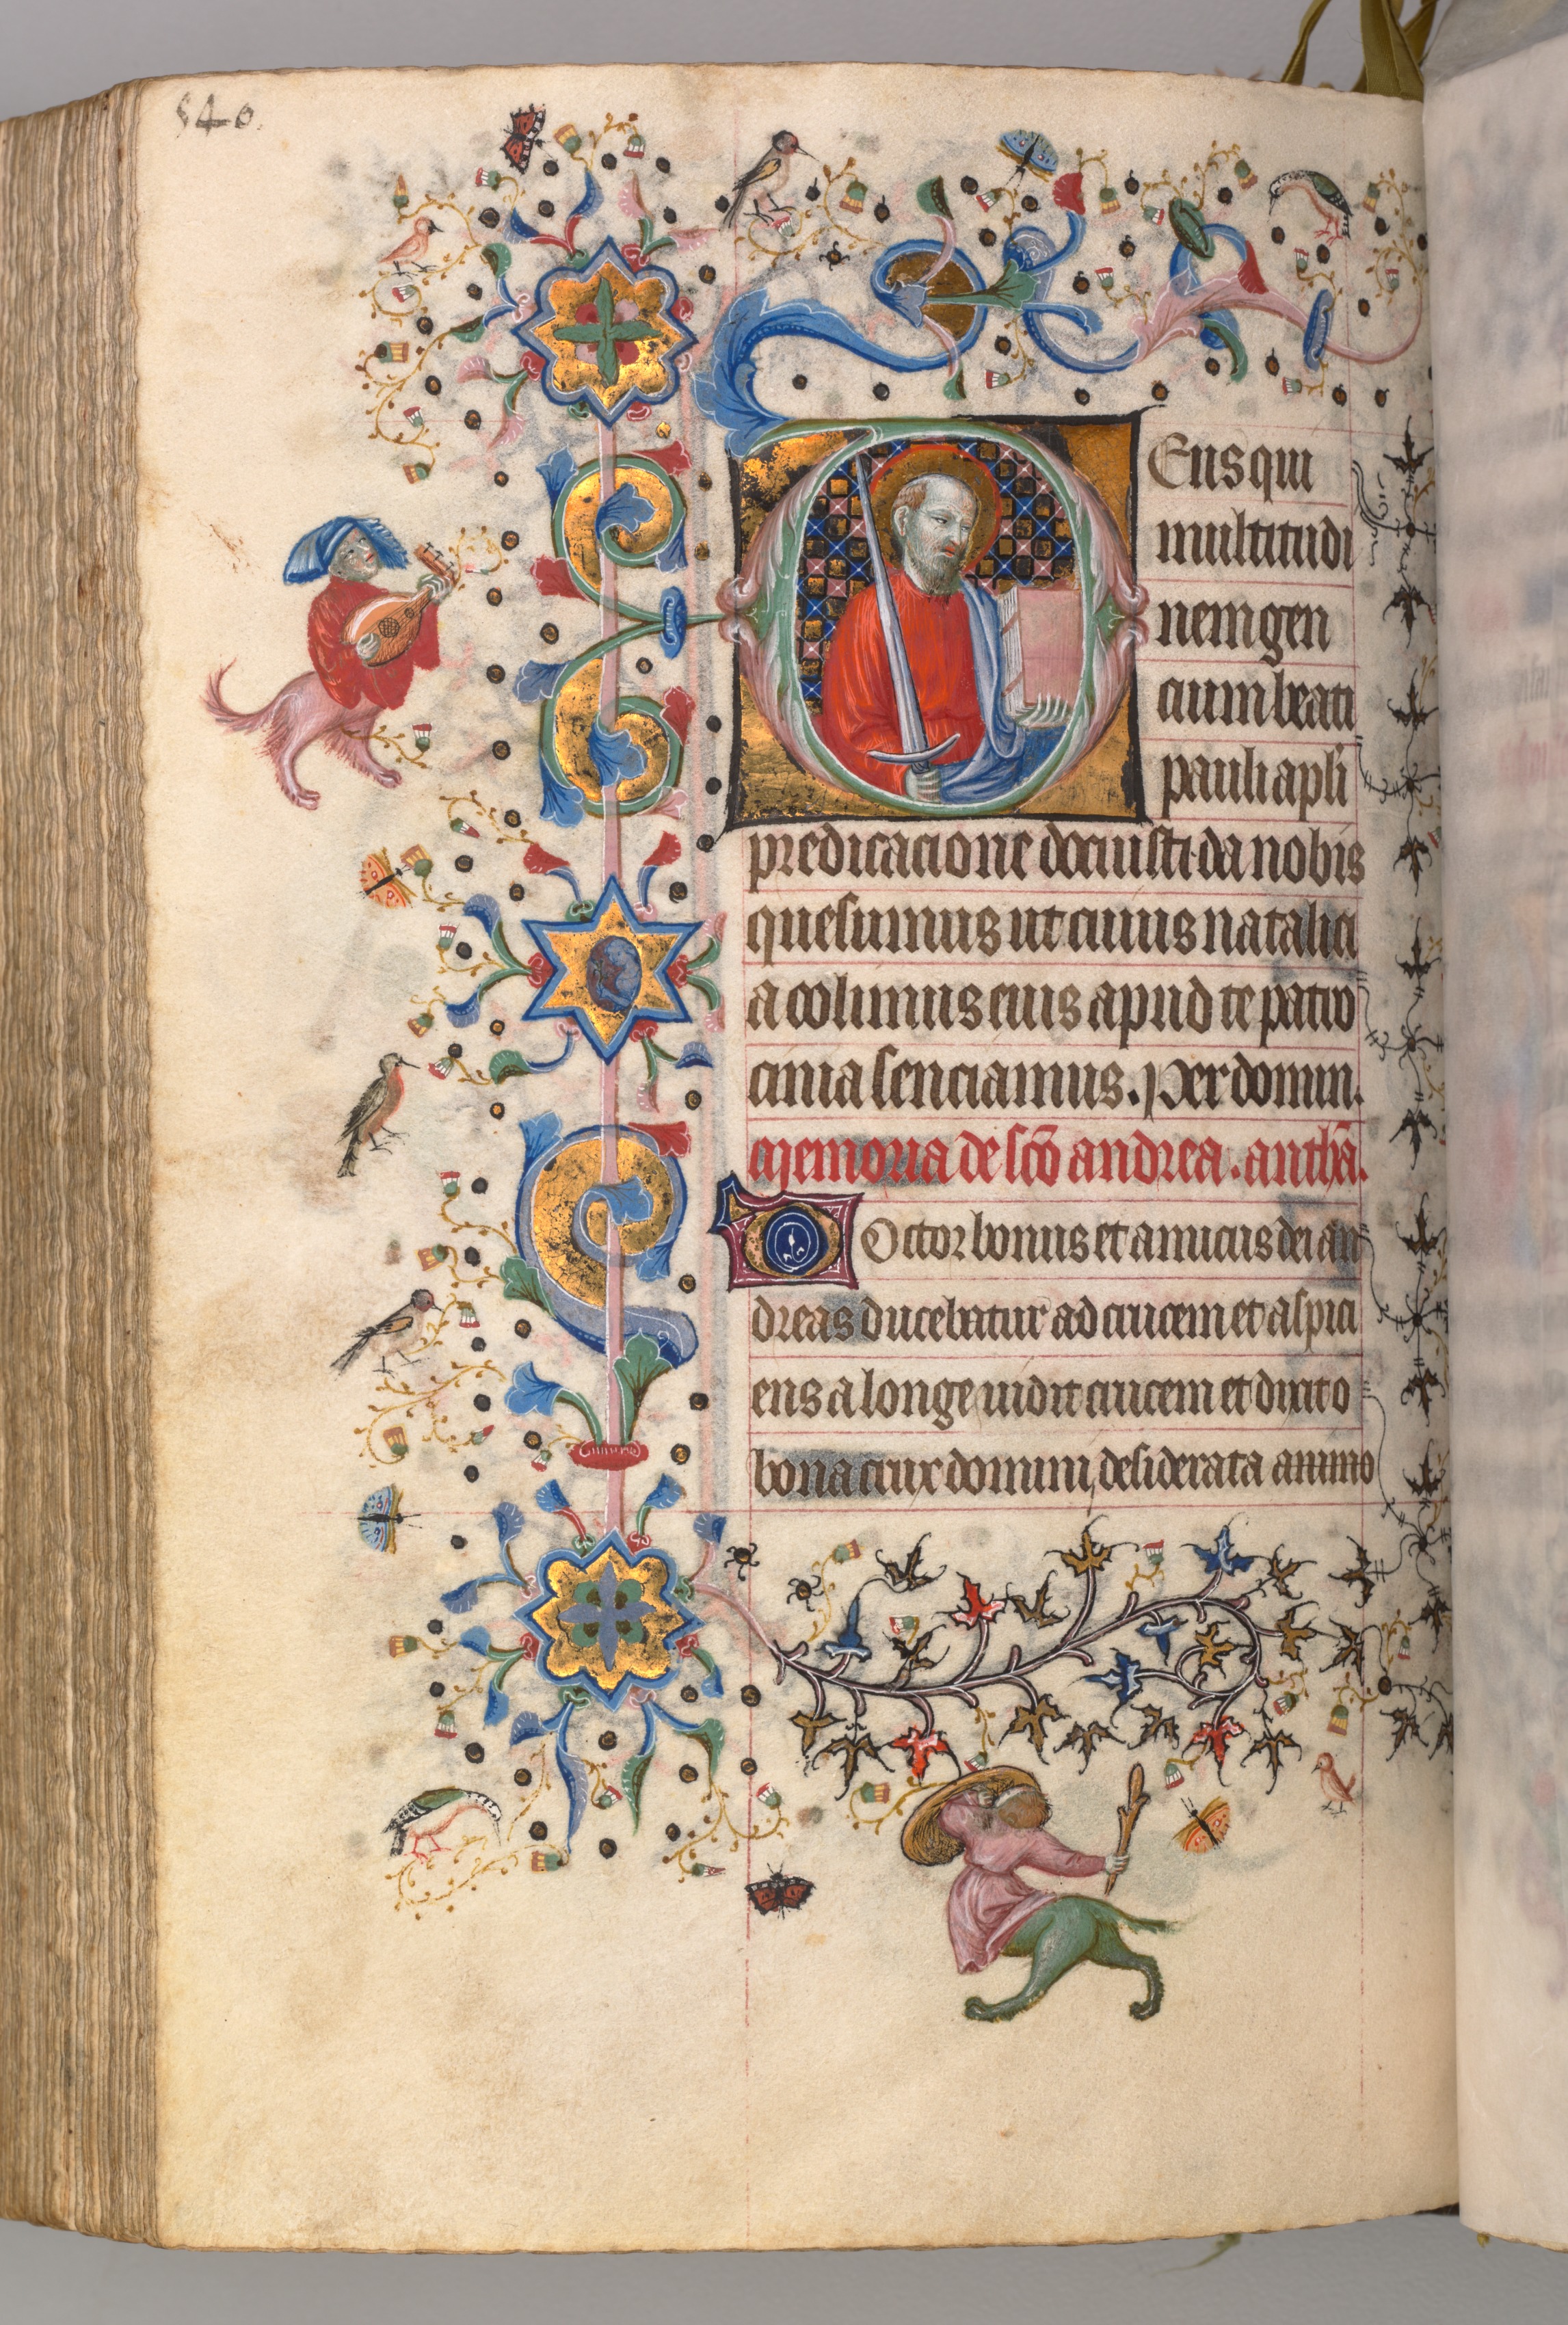 Hours of Charles the Noble, King of Navarre (1361-1425): fol. 264v, St. Paul